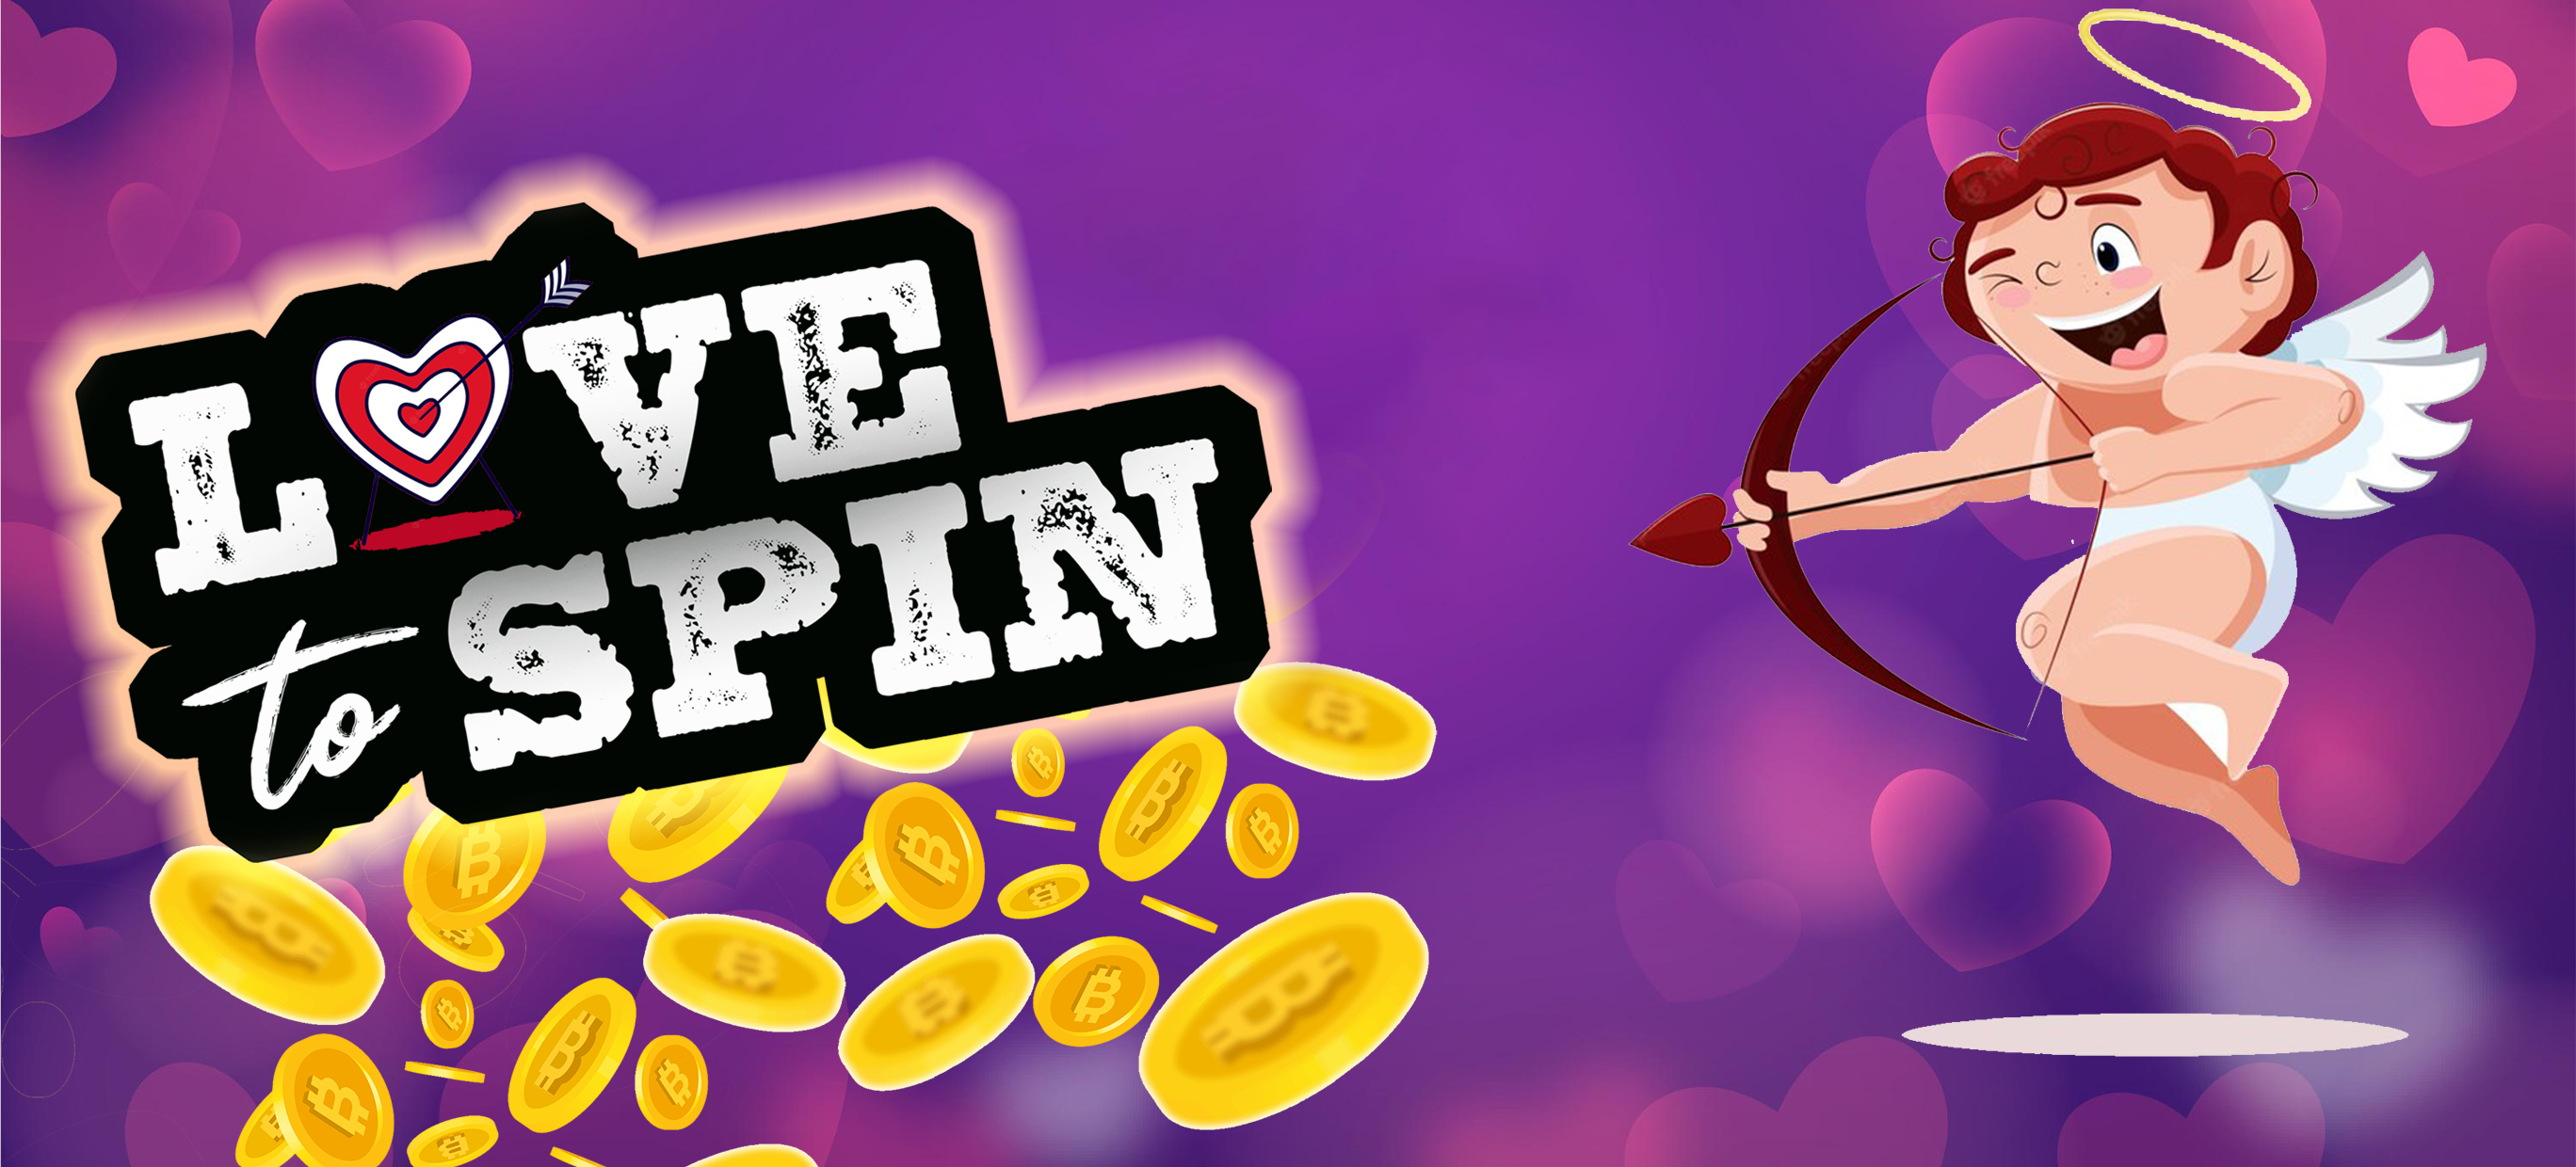 love to spin promo flyer - playbitcoingames.com